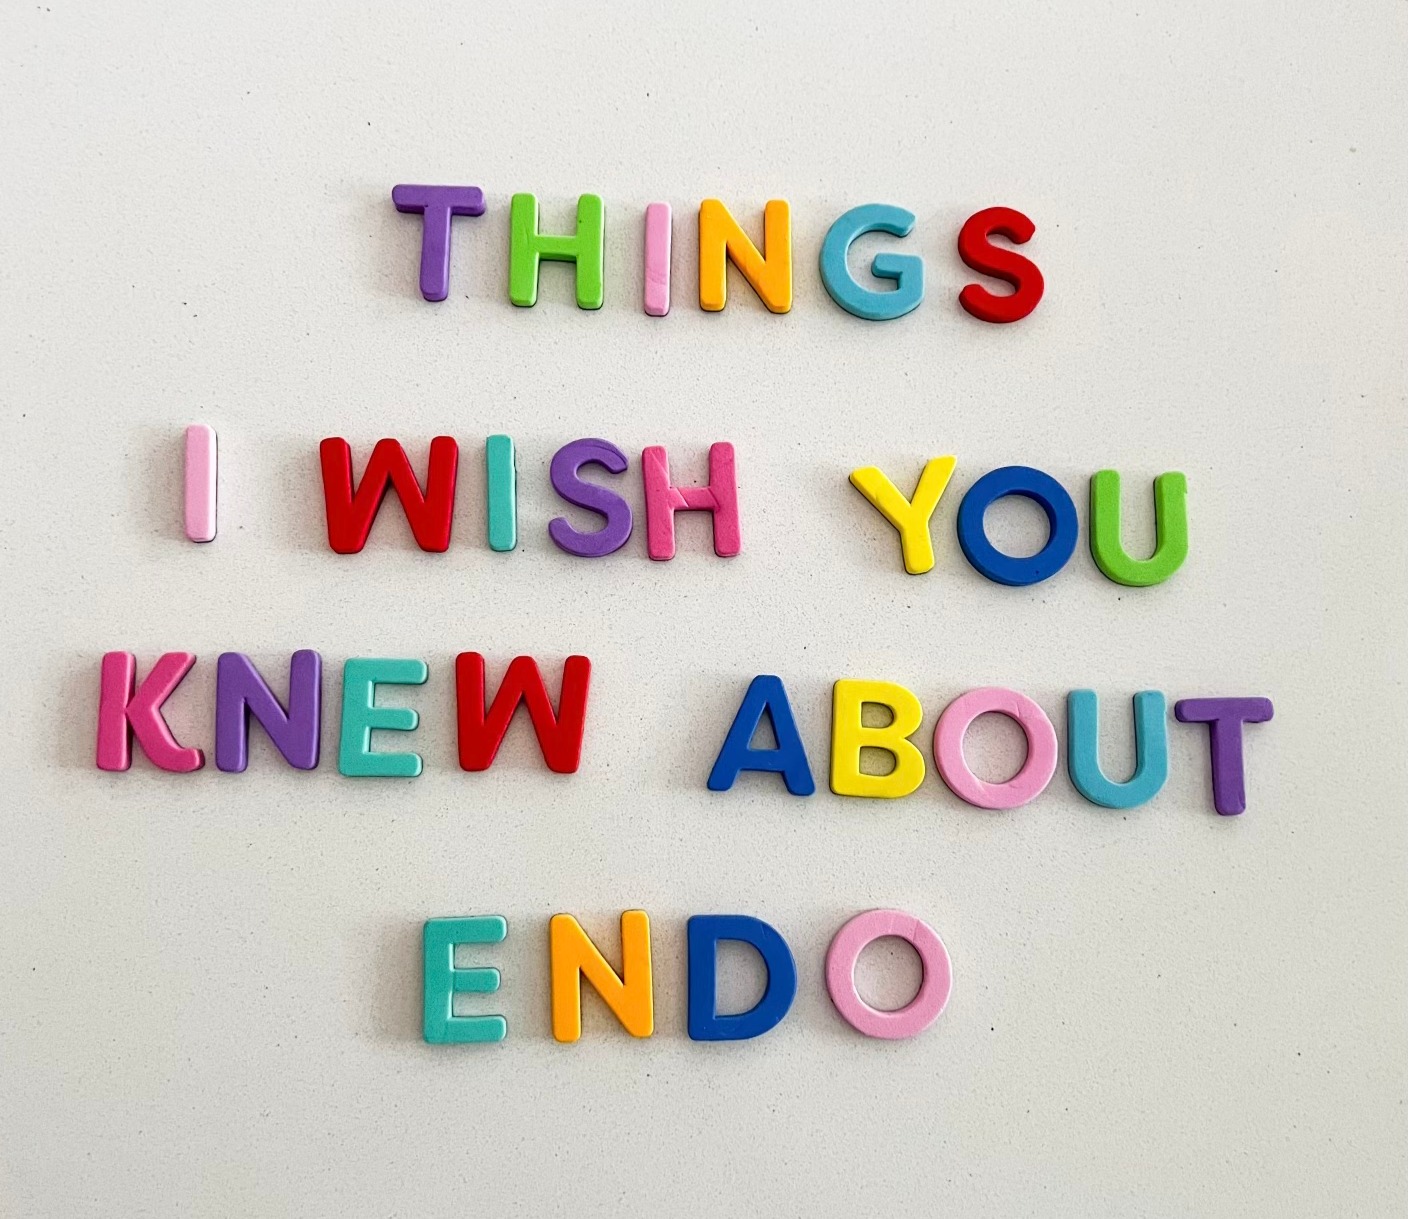 Things I wish you knew about endo